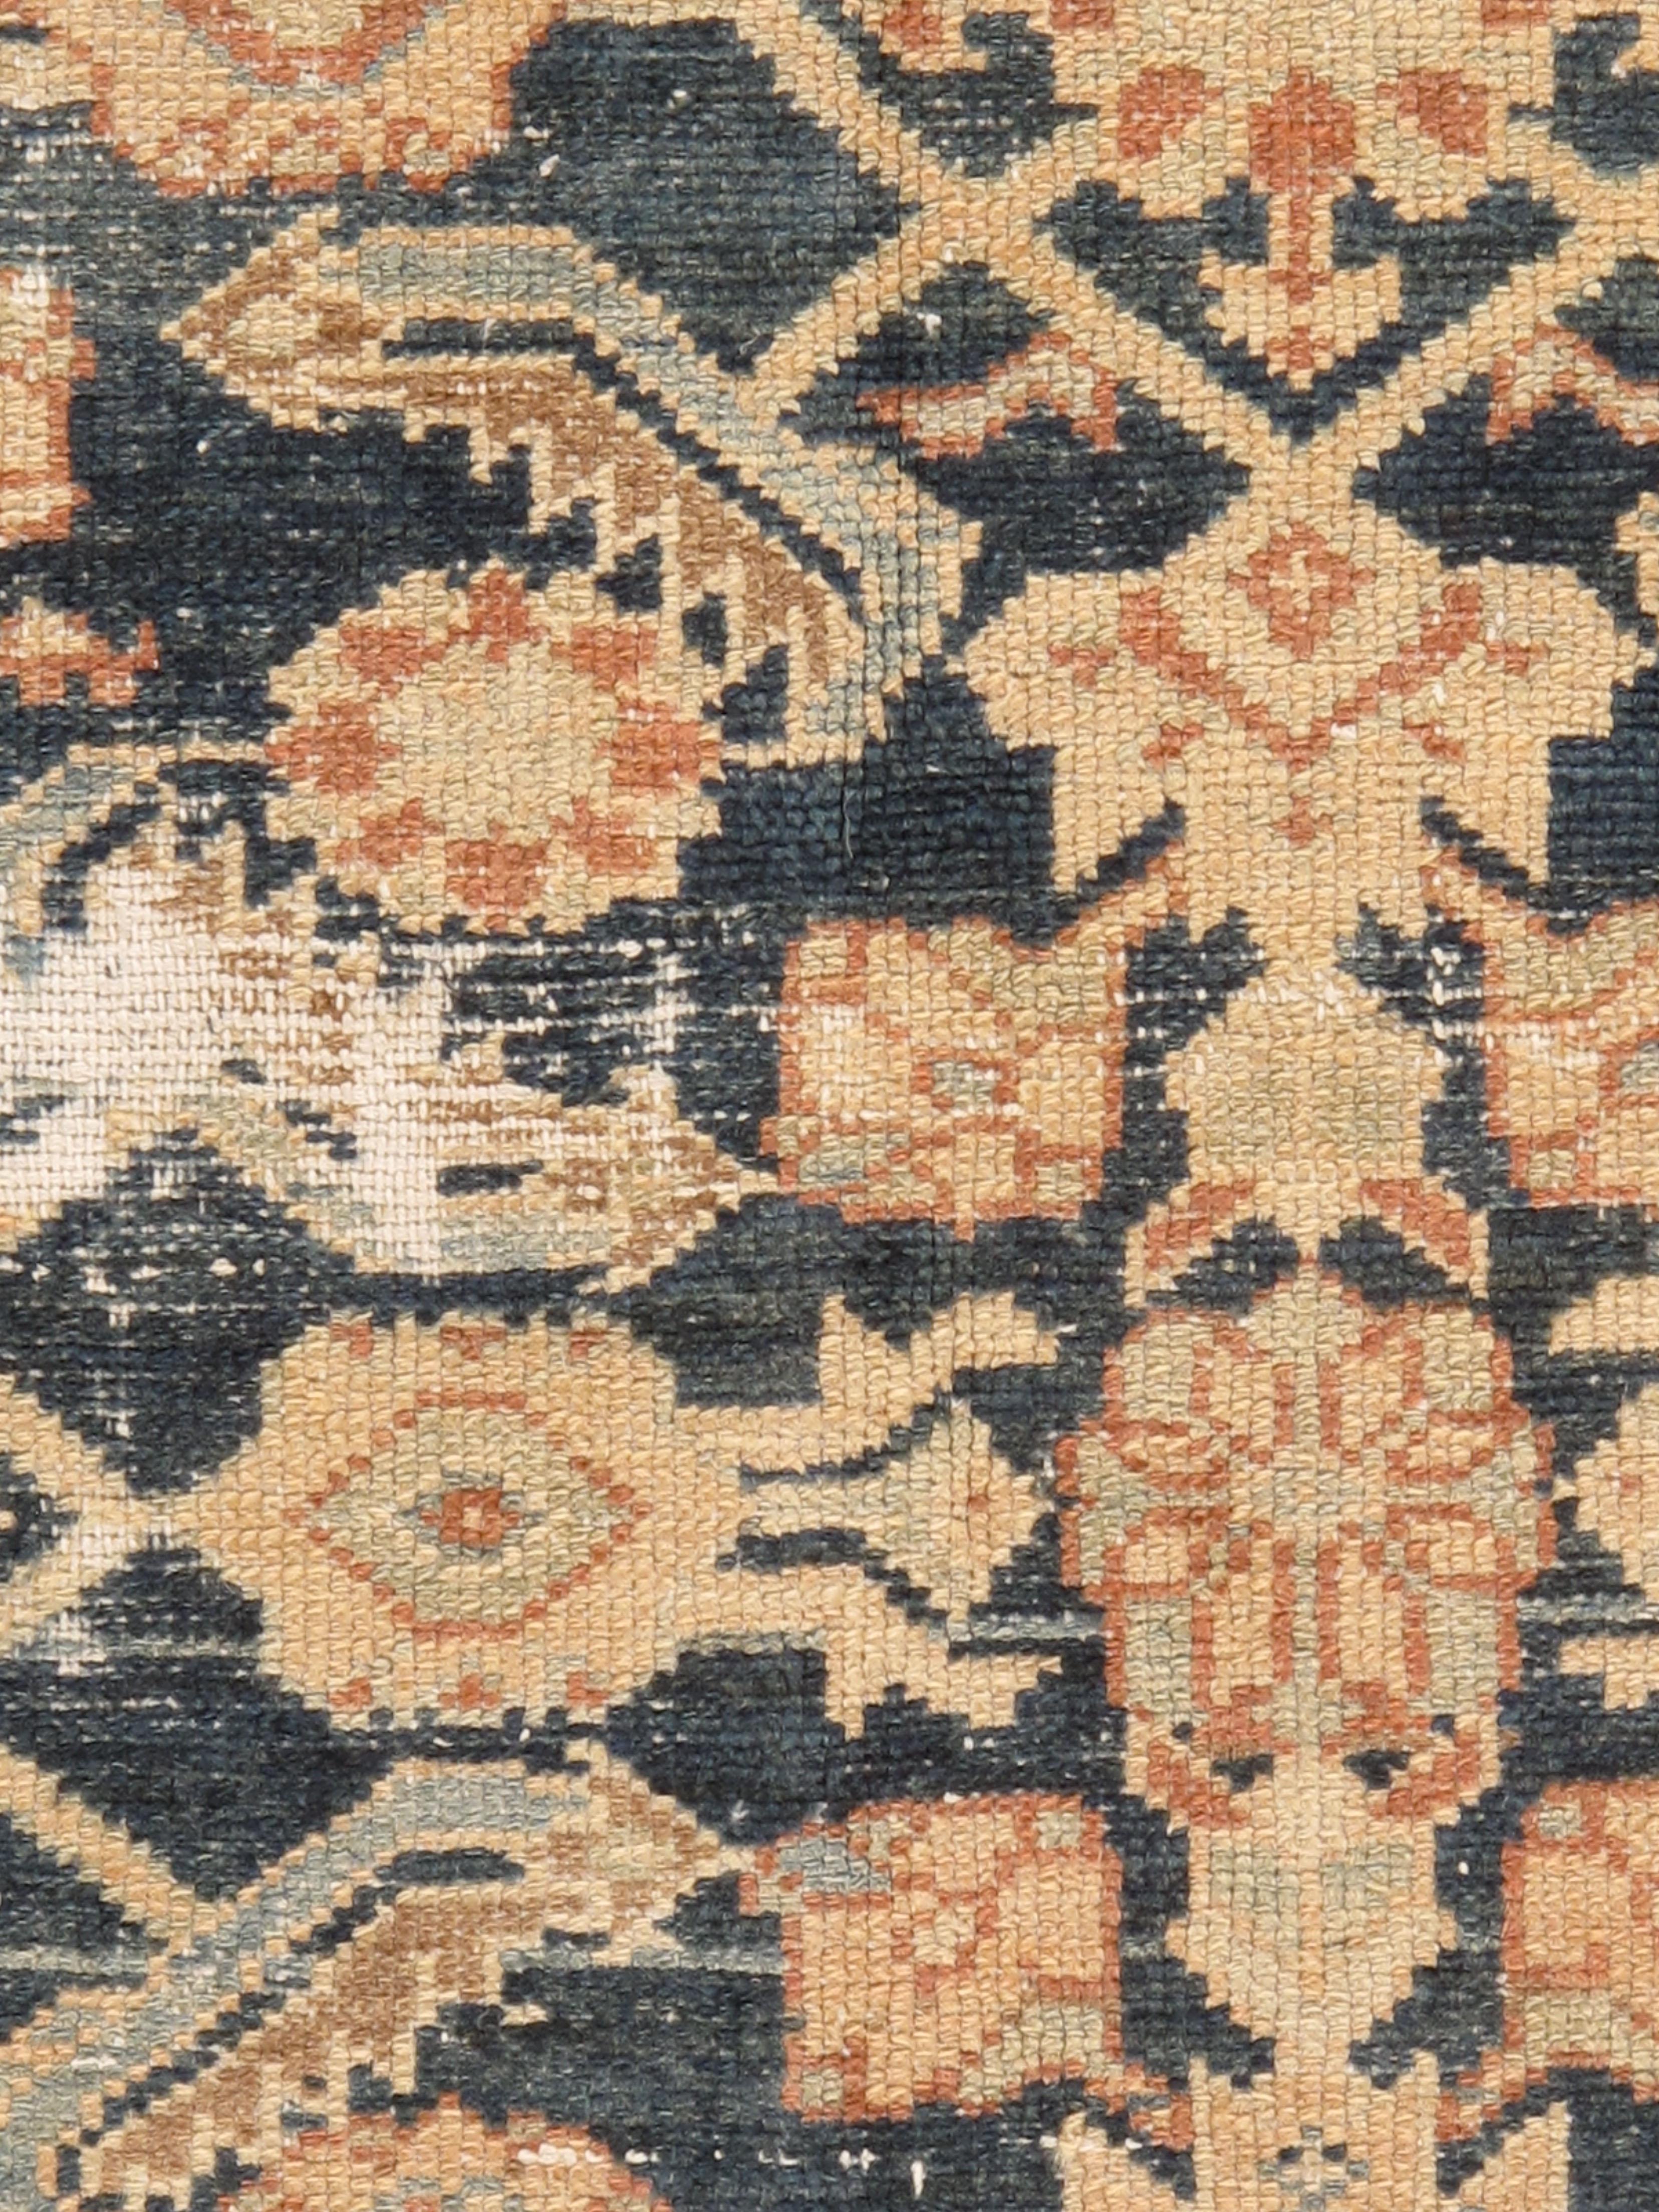 Antique slightly distressed Persian Malayer rug, circa 1900. A lovely antique Malayer handwoven rug with blues and an abrash in soft gray. Abrash is a natural change in color that occurs when different dyes are used in a batch of wool and gives